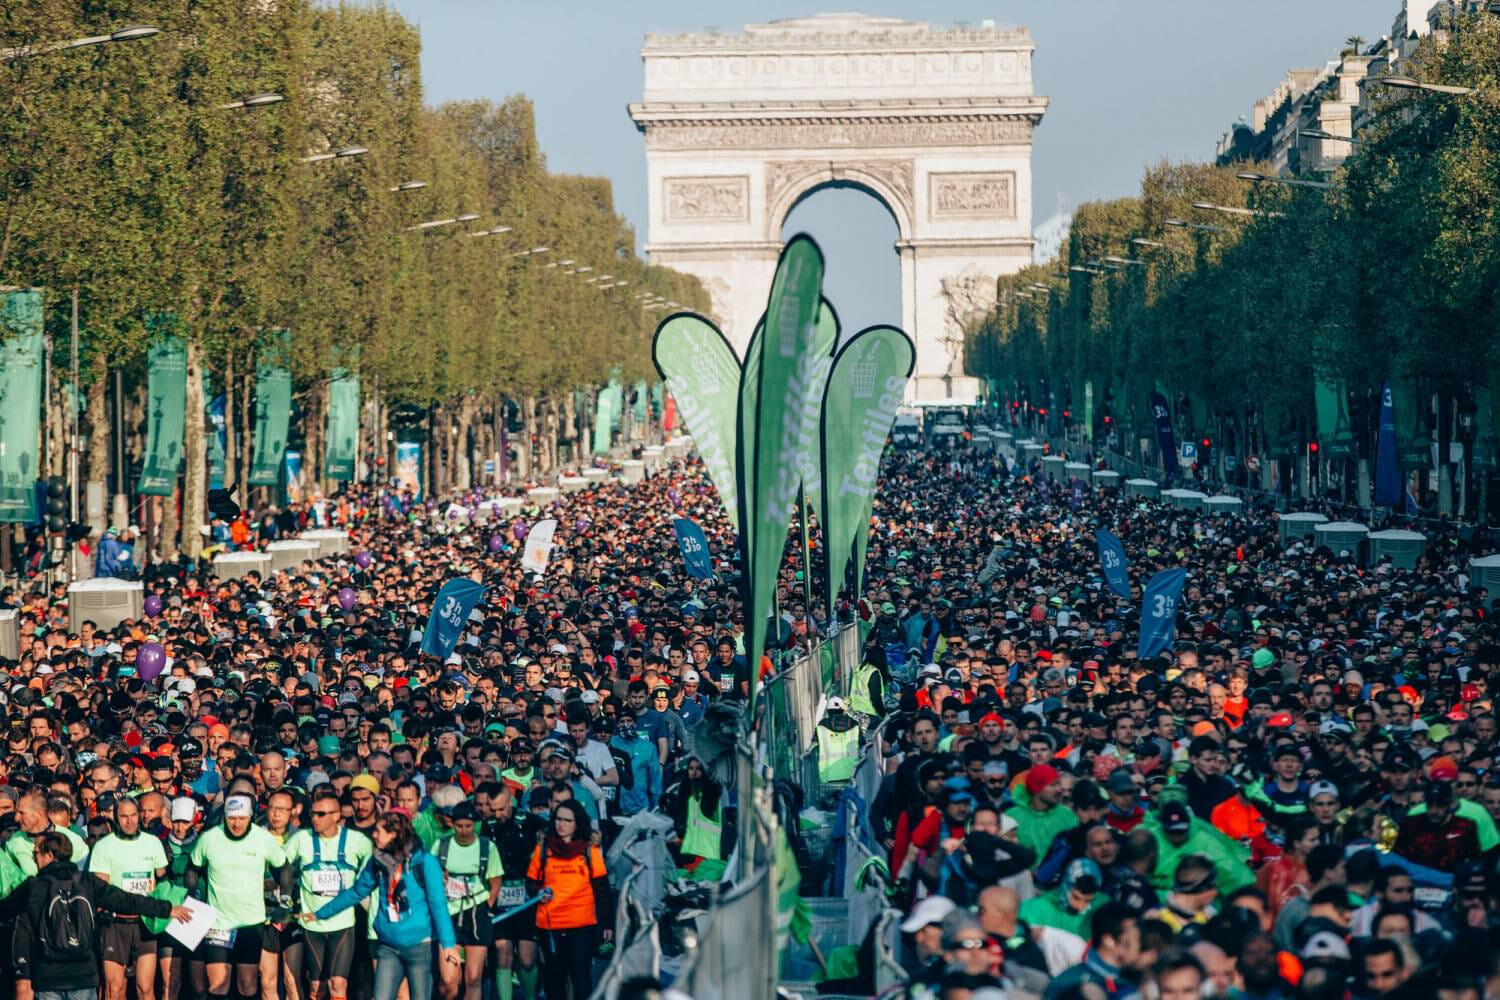 Join tens of thousands of people at the Paris Marathon